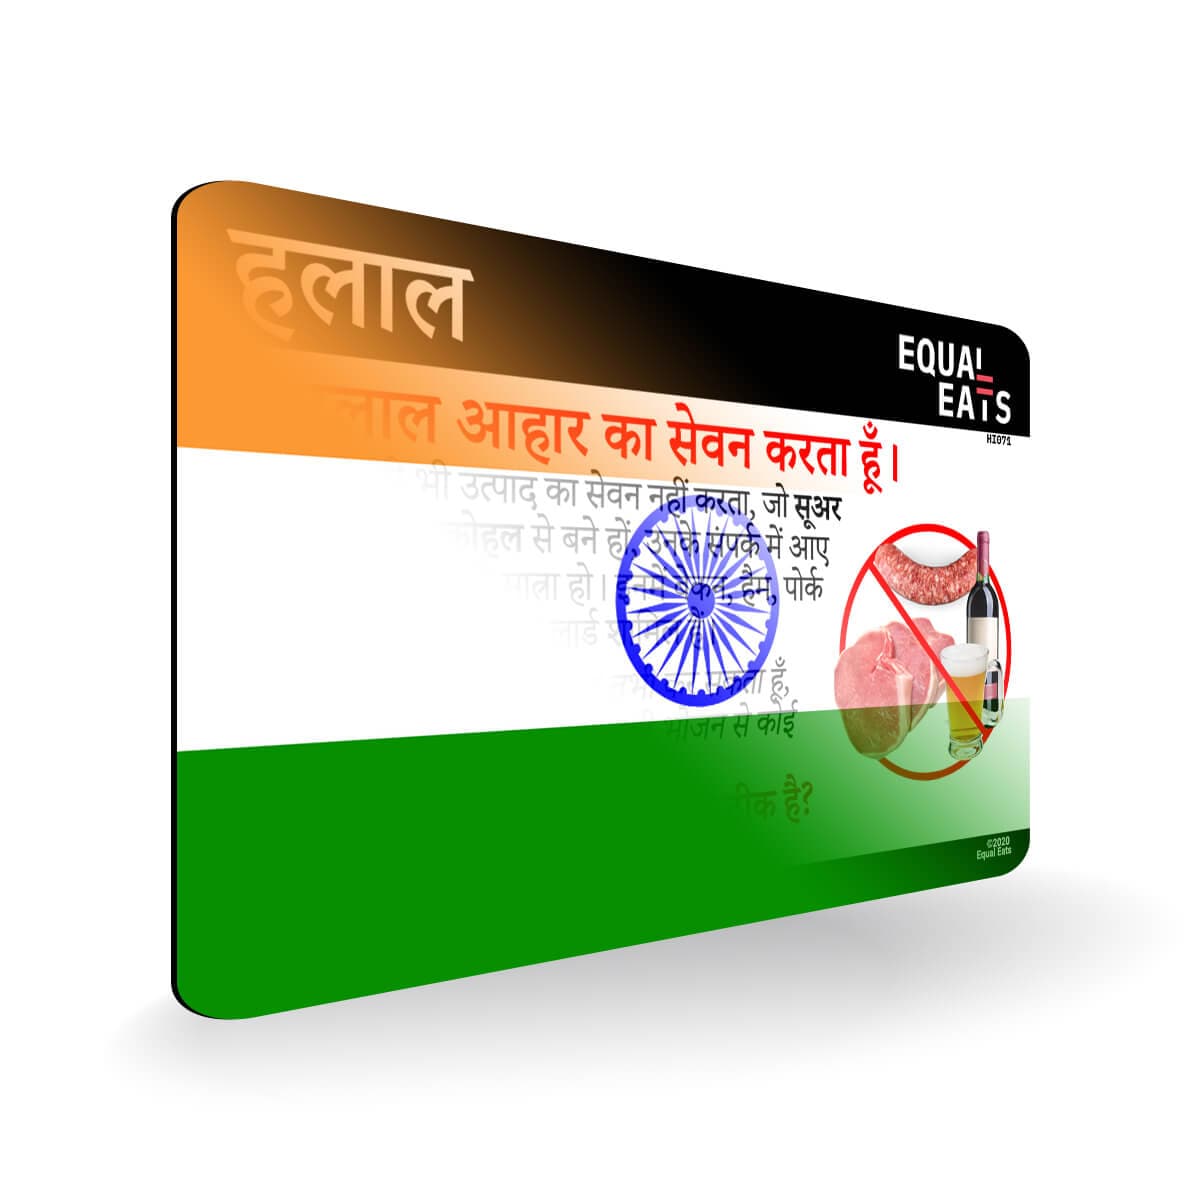 Halal Diet in Hindi. Halal Food Card for India